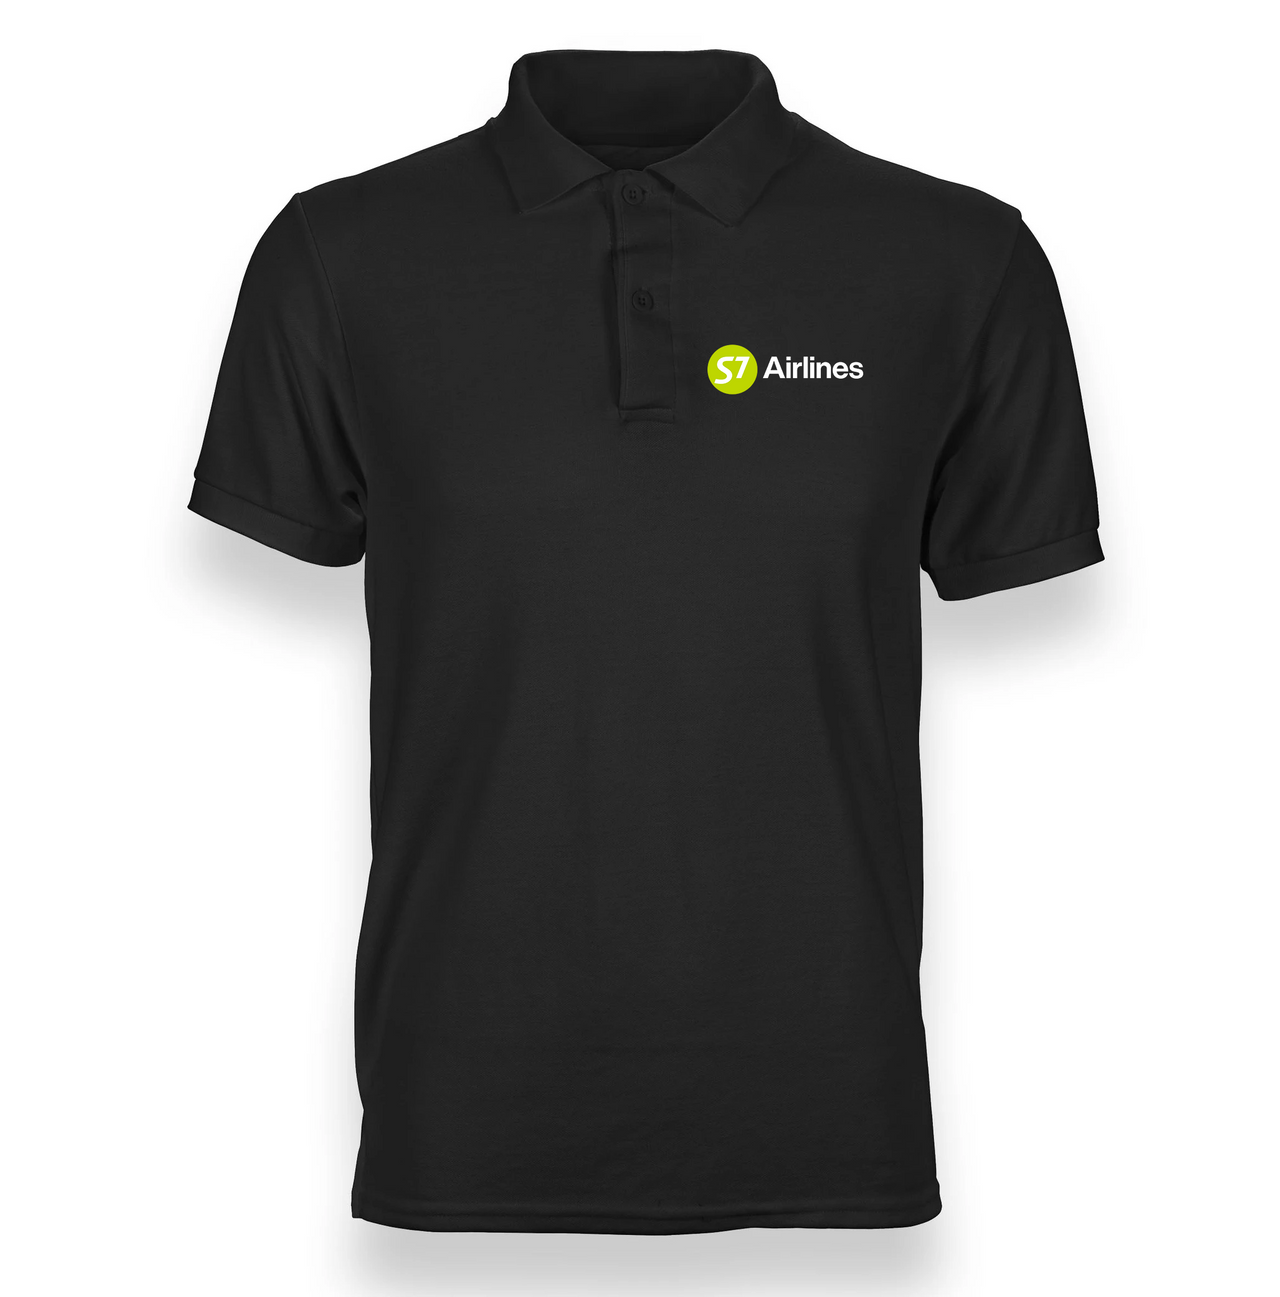 S7 AIRLINES POLO T-SHIRT